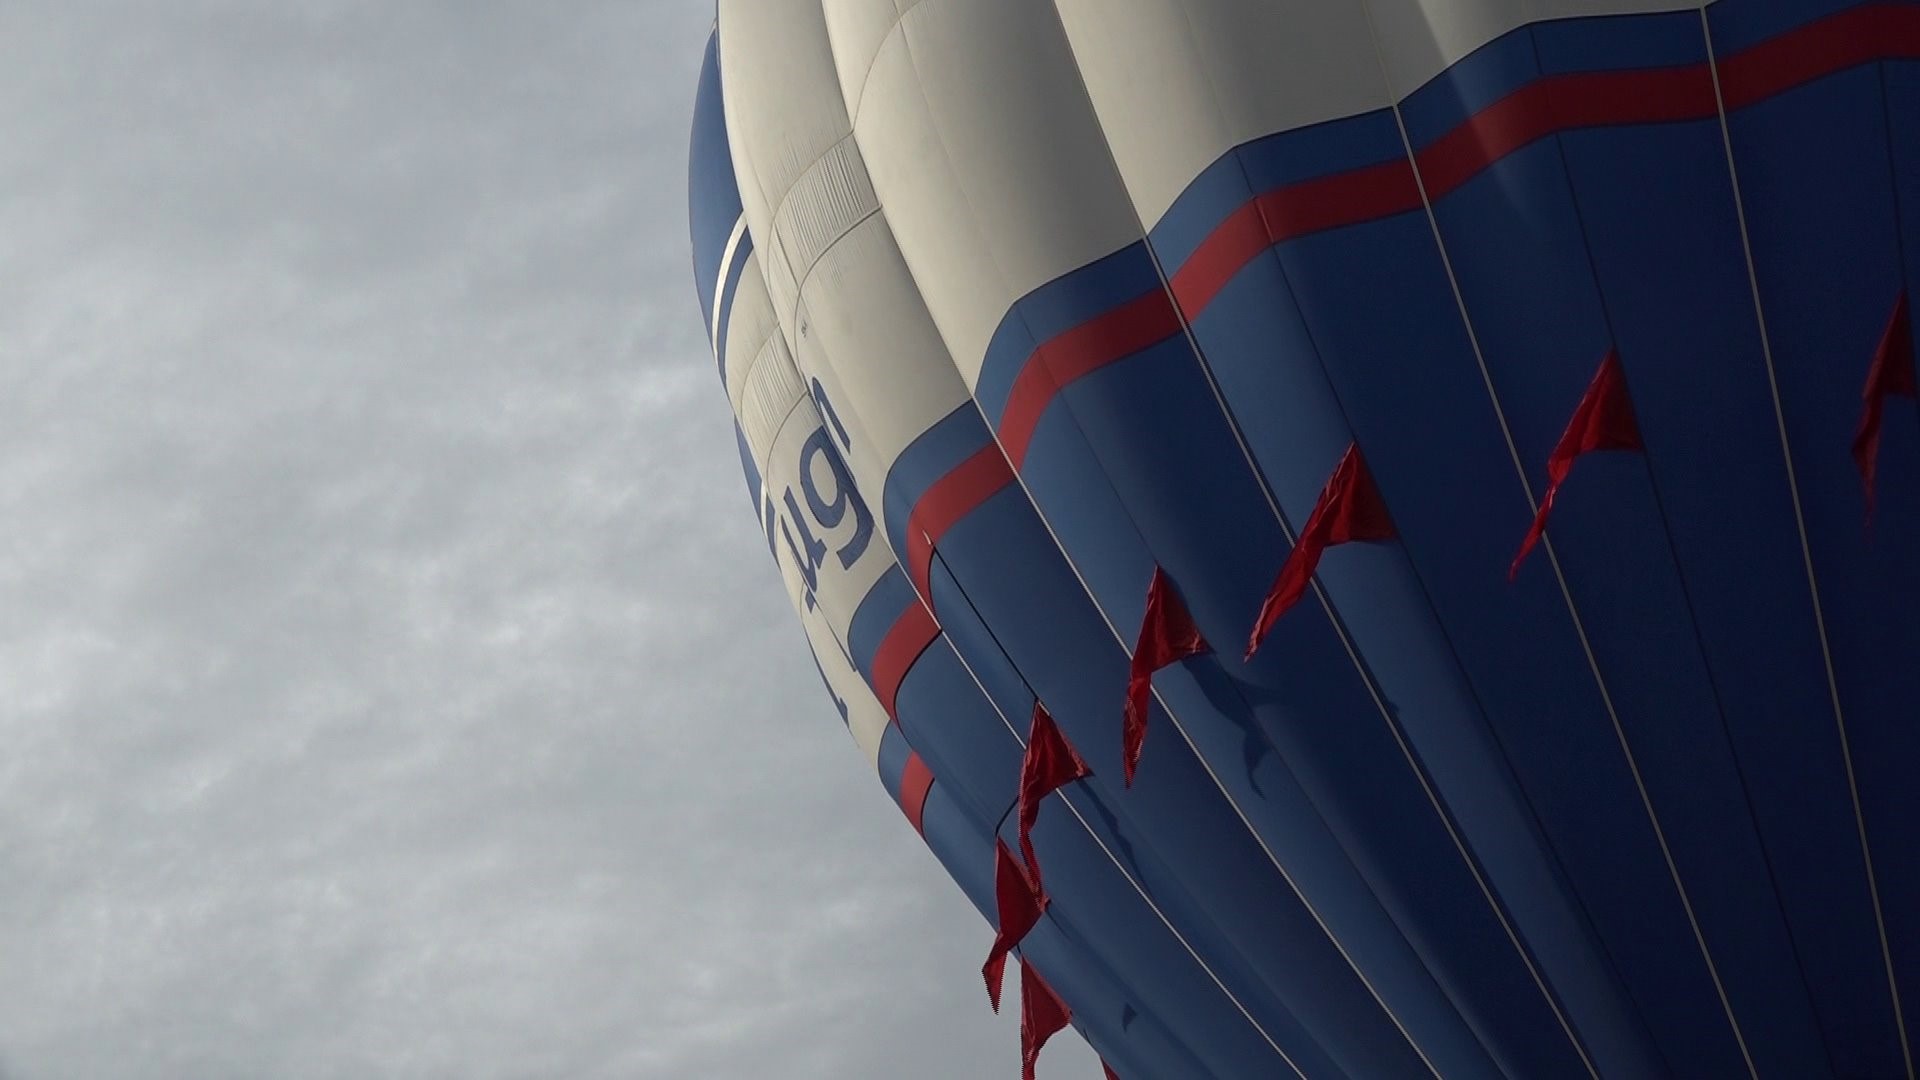 Balloon Fest Helps Boost Poteau Economy